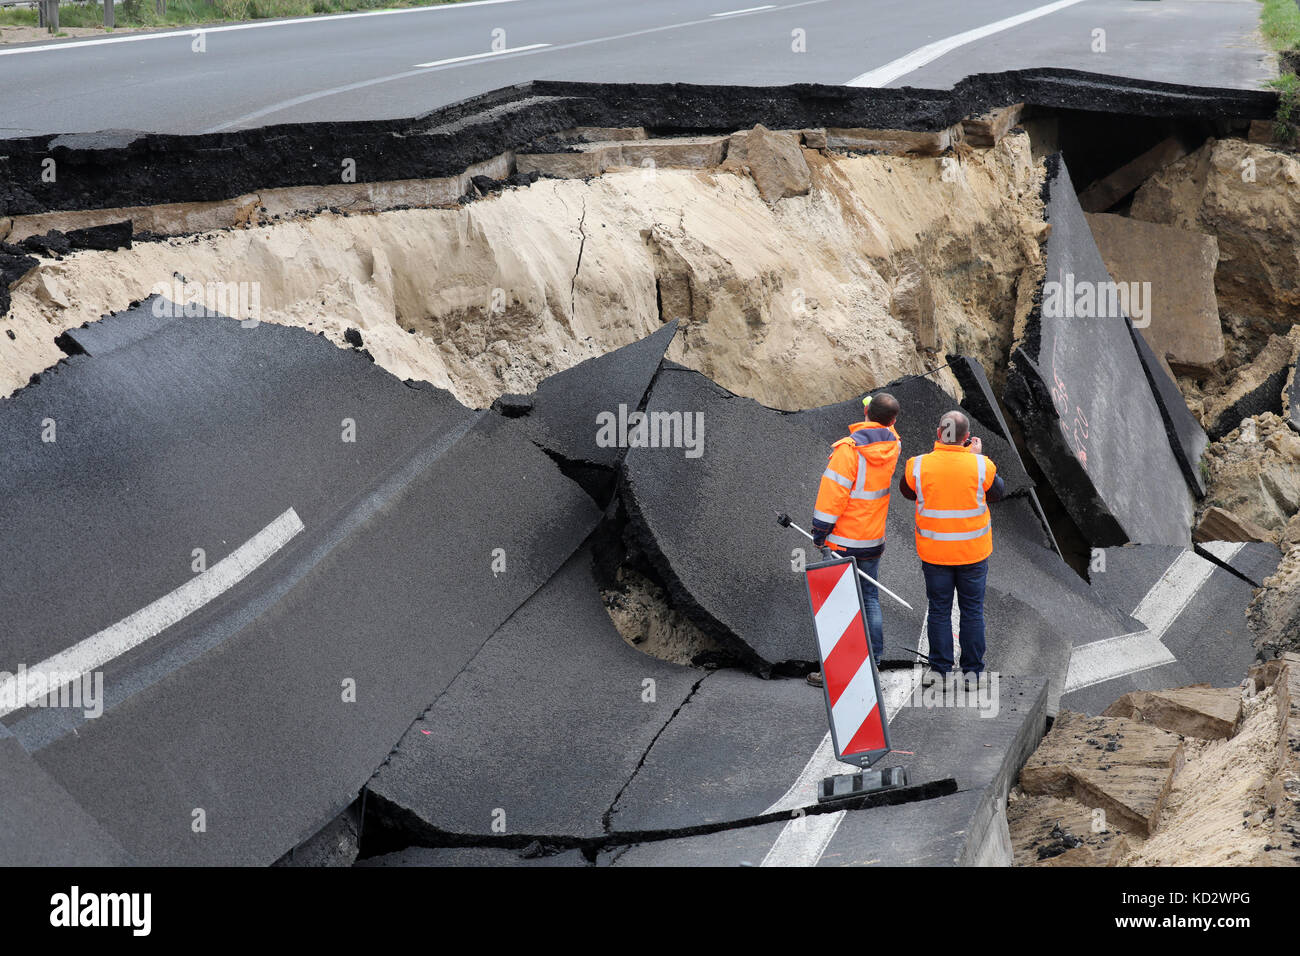 Tribsees, Germany. 10th October, 2017. The sunken section of highway of the  A20 at the Trebeltal bridge being appraised by surveyors near Tribsees,  .The highway in direction west sunk about half a